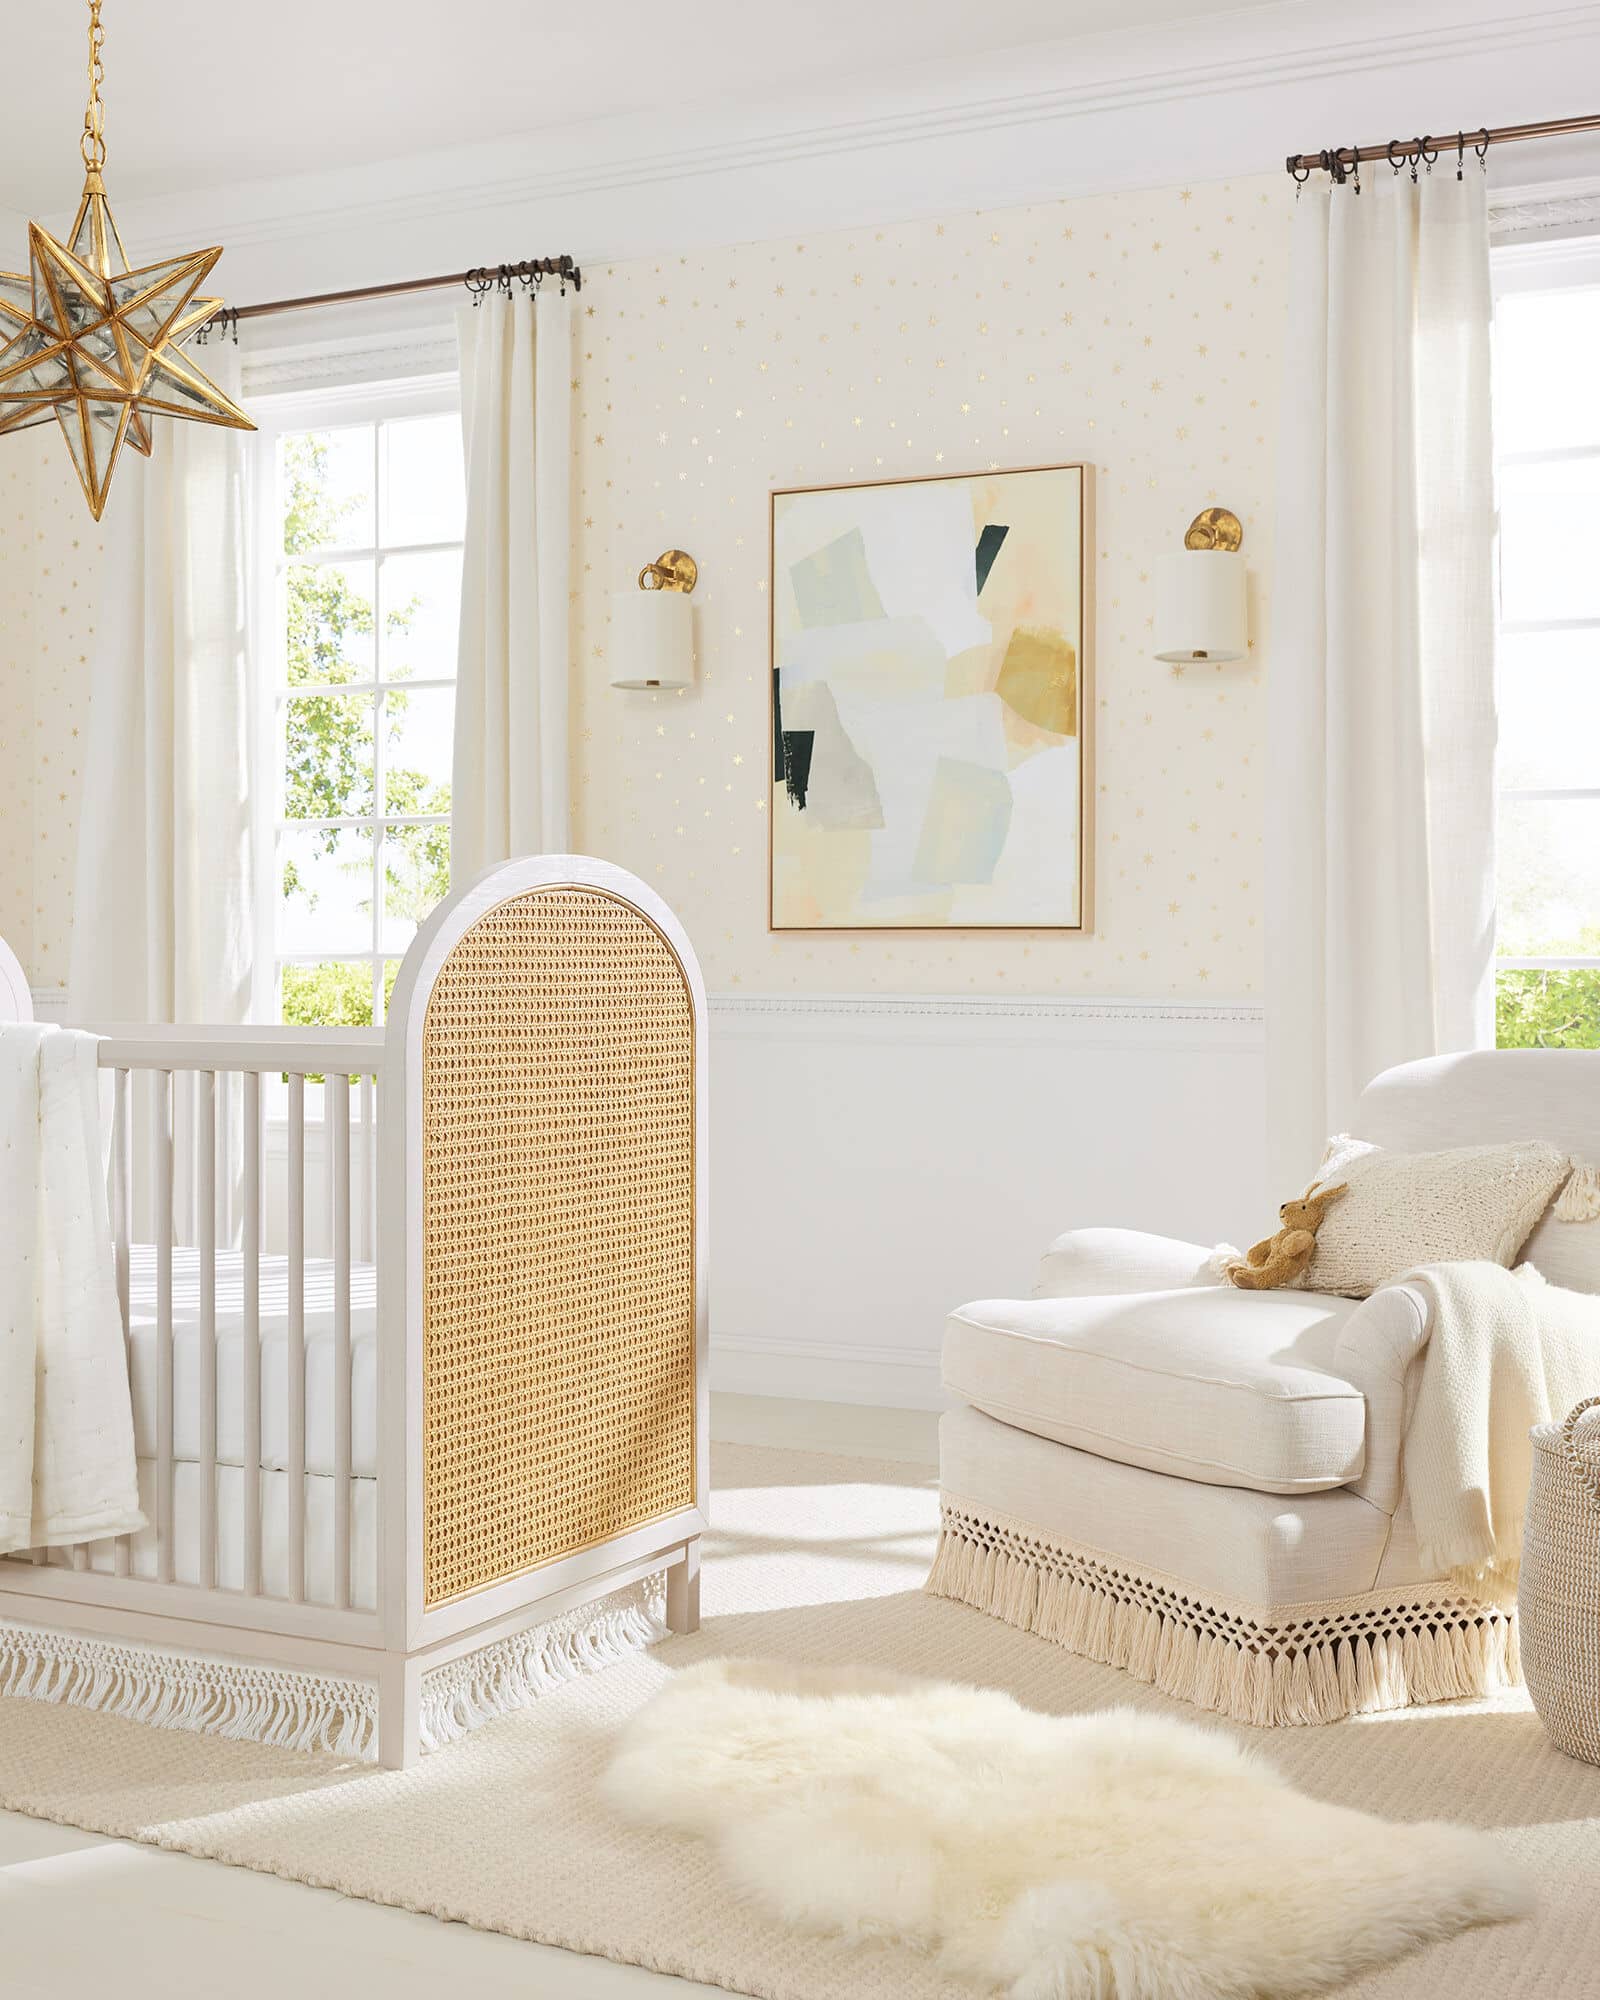 Chic neutral nursery from Serena & Lily - wicker crib - abstract art